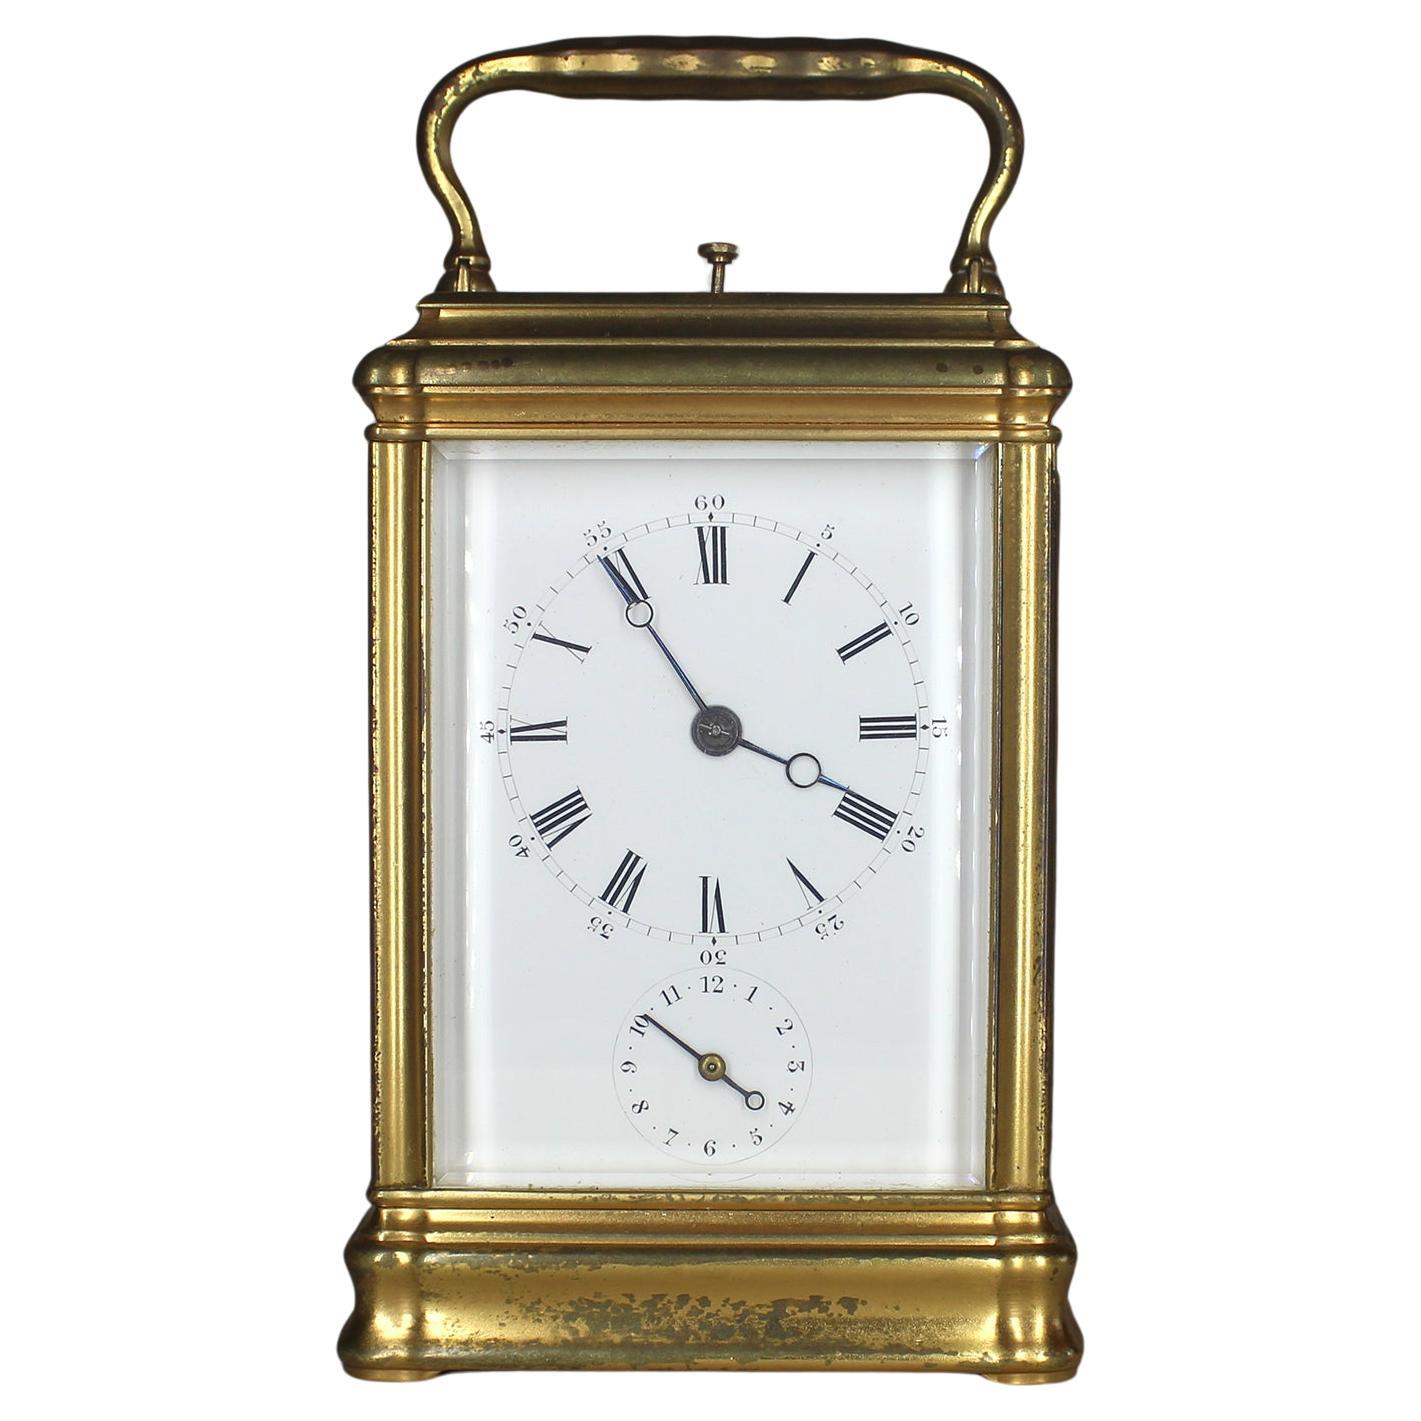 Repeating Drocourt Carriage Clock with Alarm For Sale